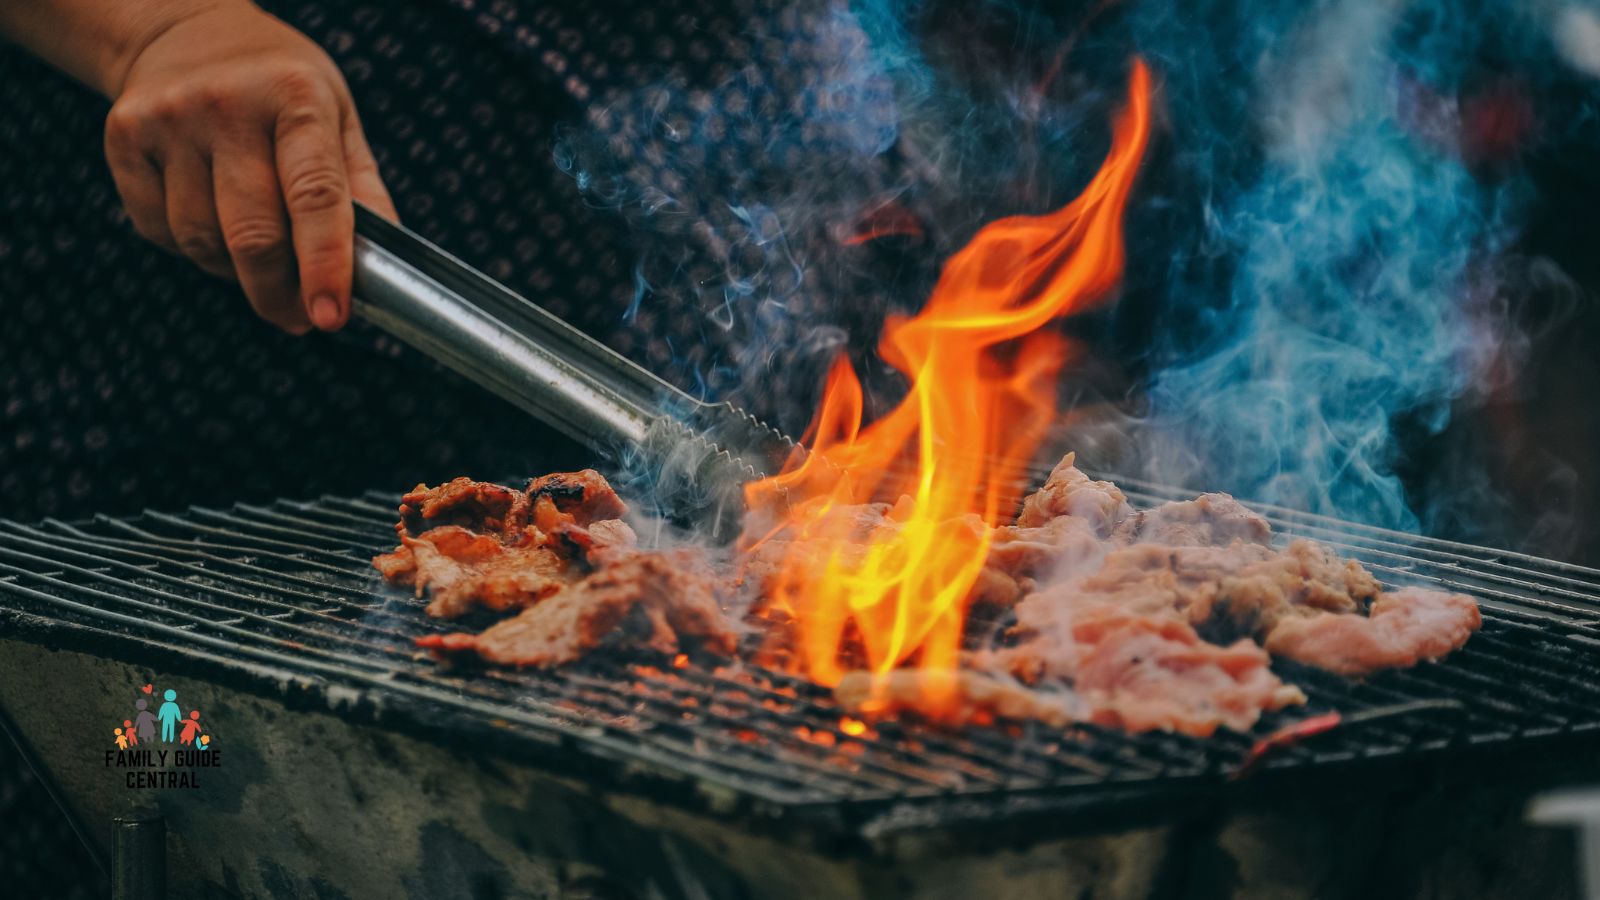 Man using kitchen tongs to barbecue - familyguidecentral.com